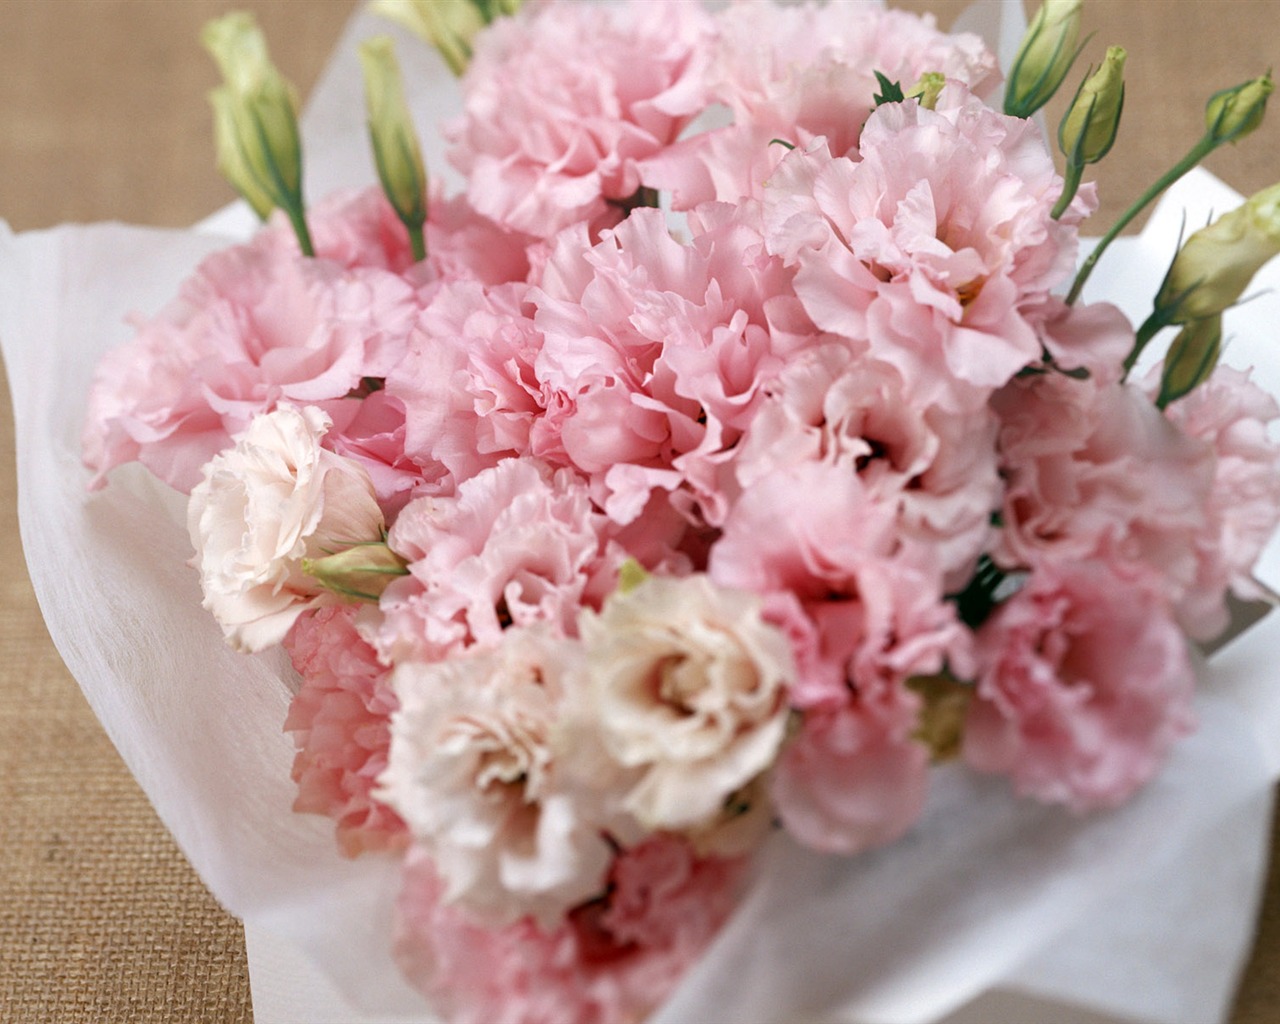 Flowers and gifts wallpaper (1) #6 - 1280x1024